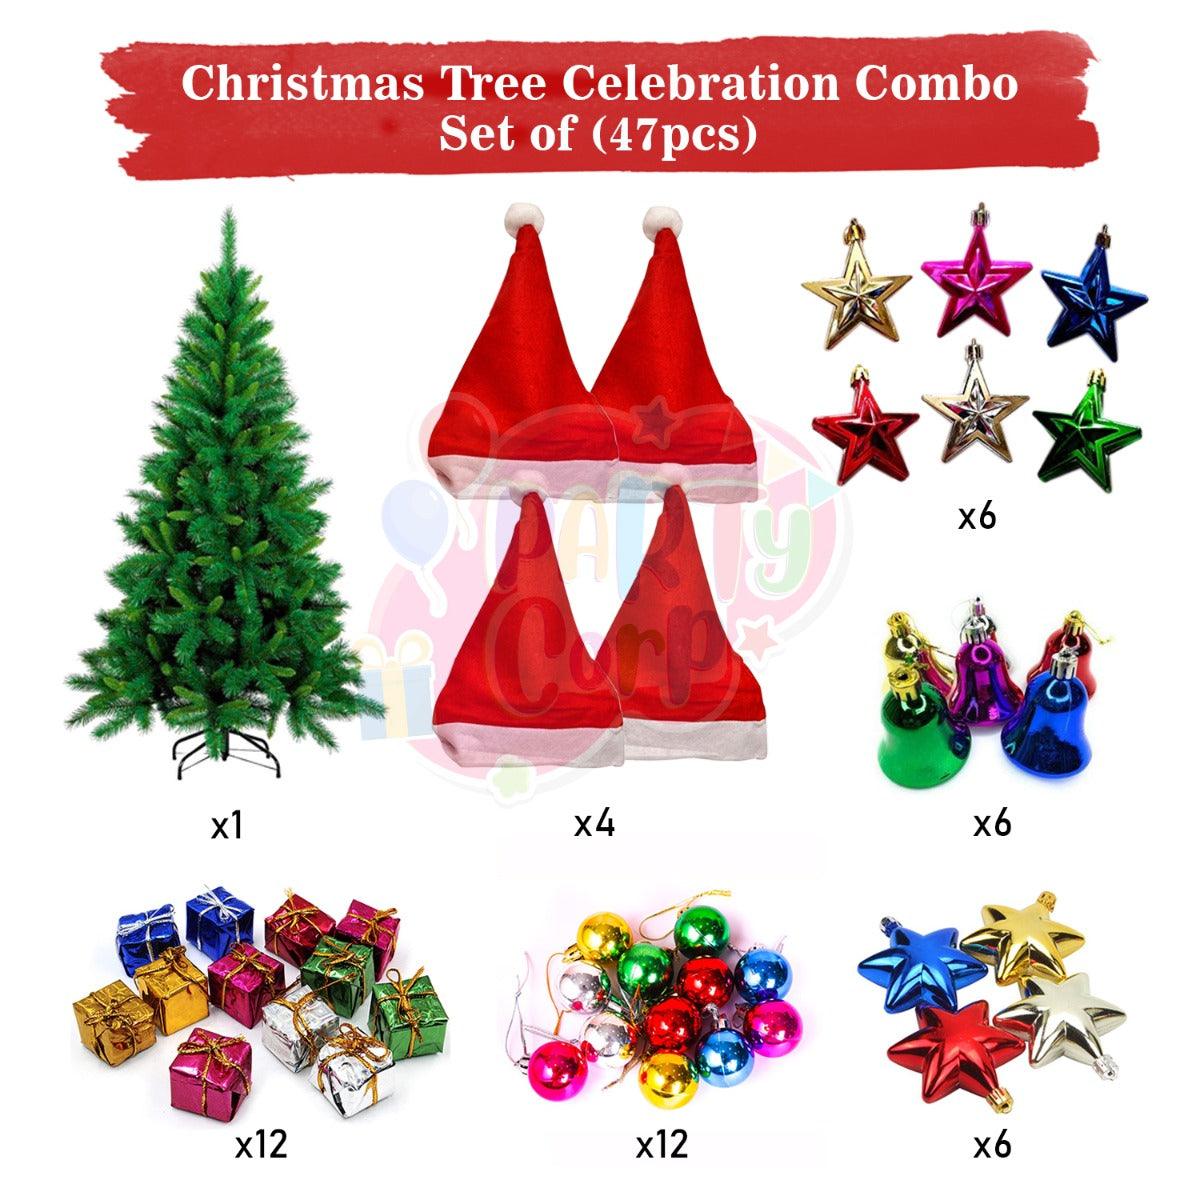 PartyCorp Merry Christmas Christmas Tree 4 feet with Danglers and Hats Combo 47 pcs - Christmas Tree, Red and White Santa Hats, Star Shaped Danglers, Big Star Shaped Danglers, Bell Shaped Danglers, Ball Shaped Danglers, Gift box shaped Danglers